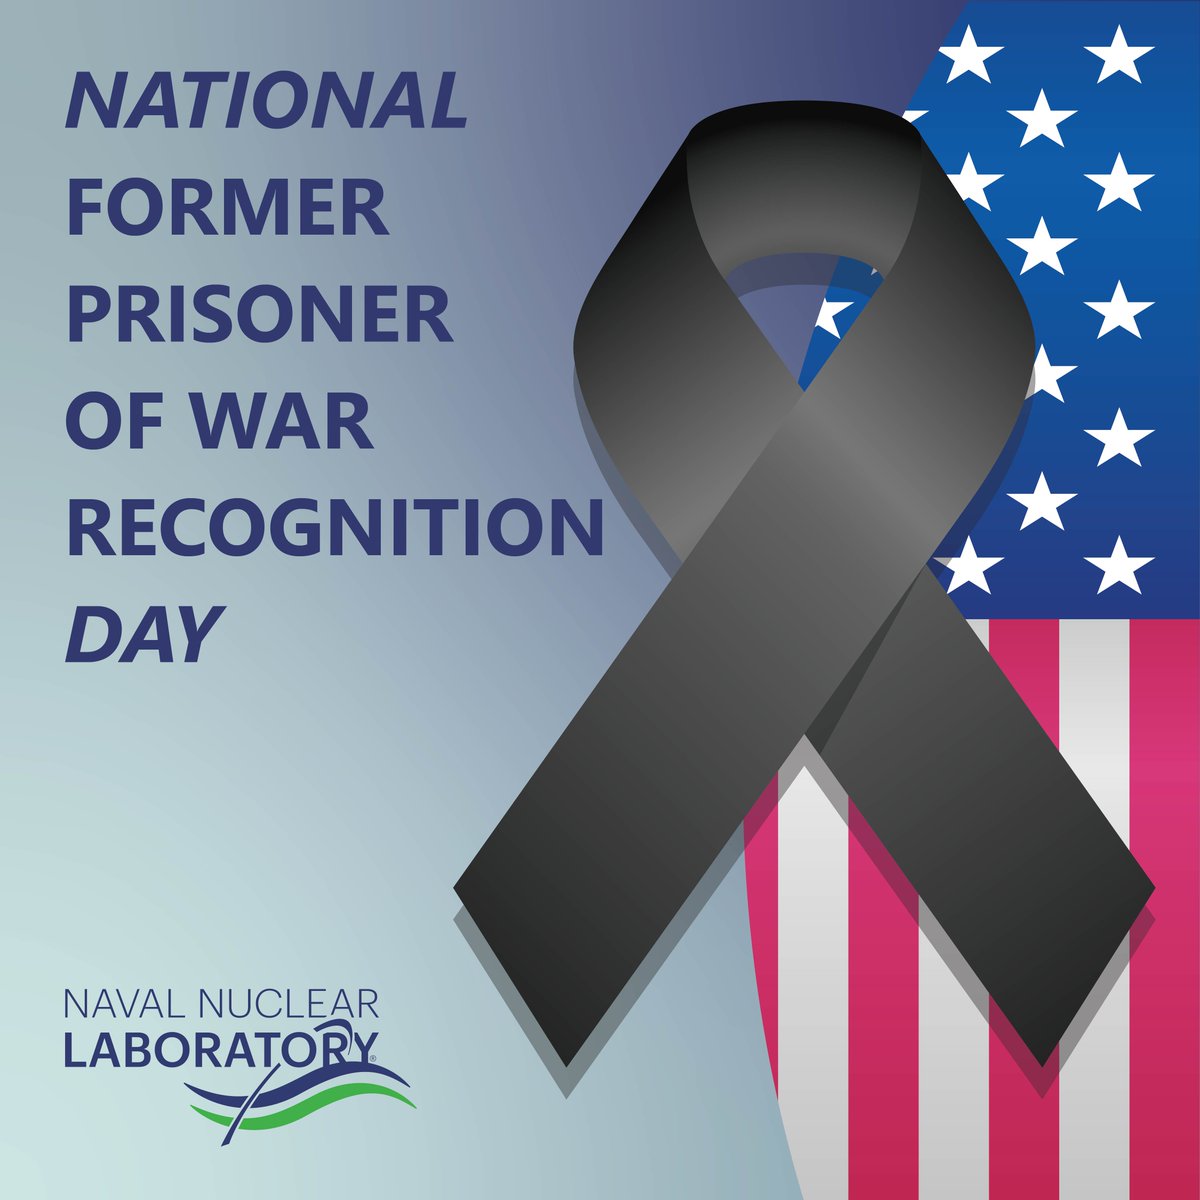 On #NationalFormerPOWDay we honor the over 500,000 captured wartime servicemembers who showed uncommon bravery during their internment and came home to a relieved and grateful nation.